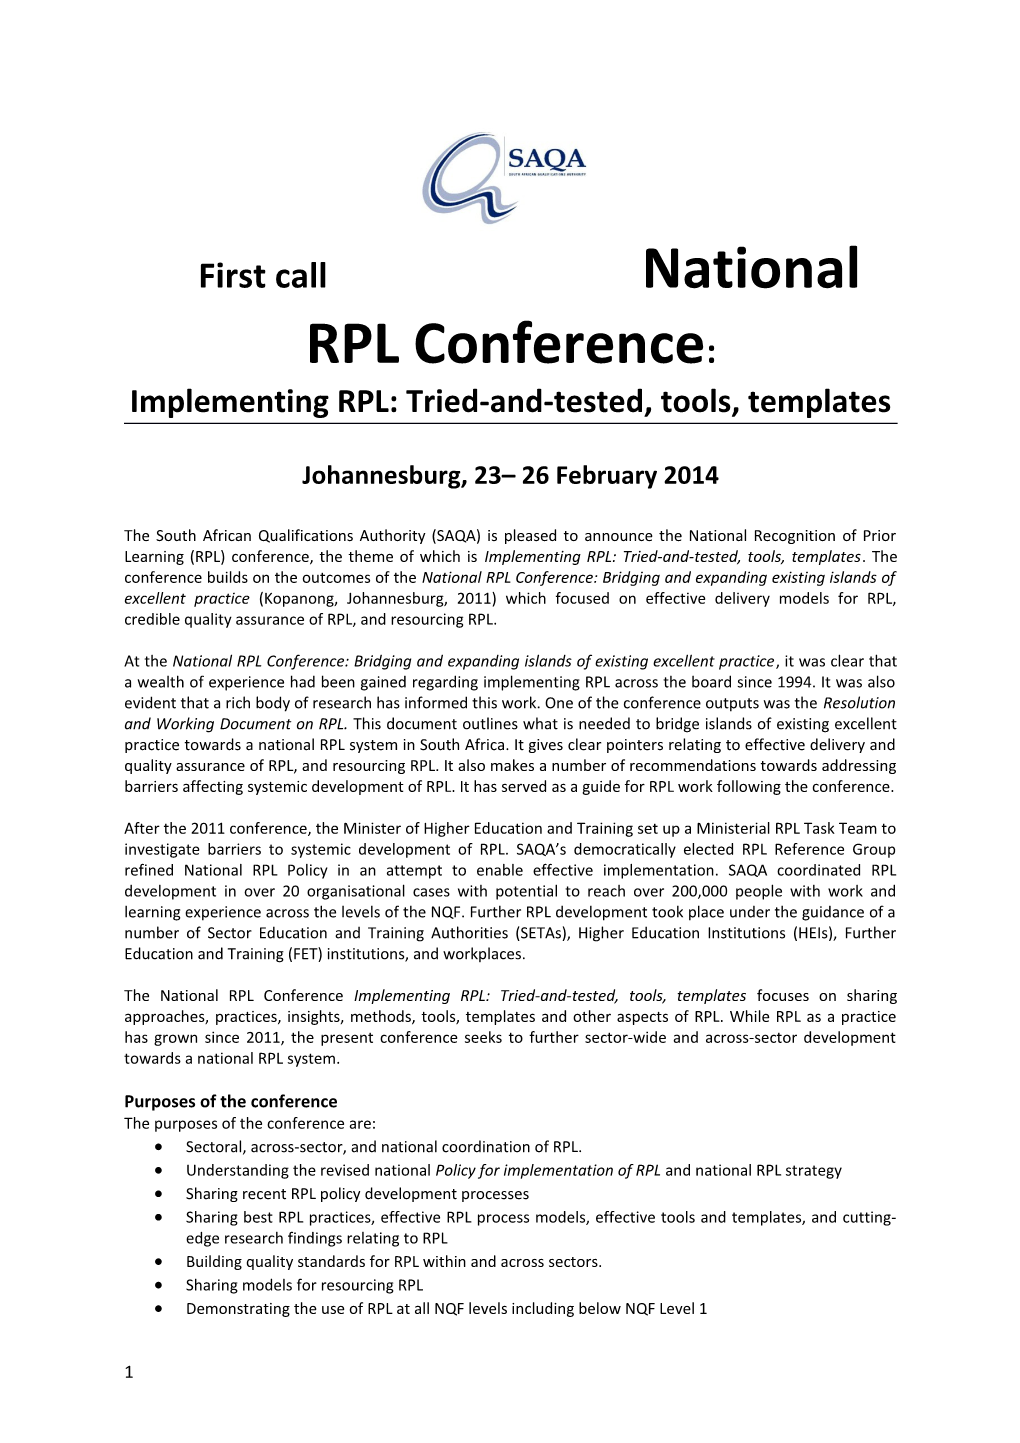 Implementing RPL: Tried-And-Tested, Tools, Templates